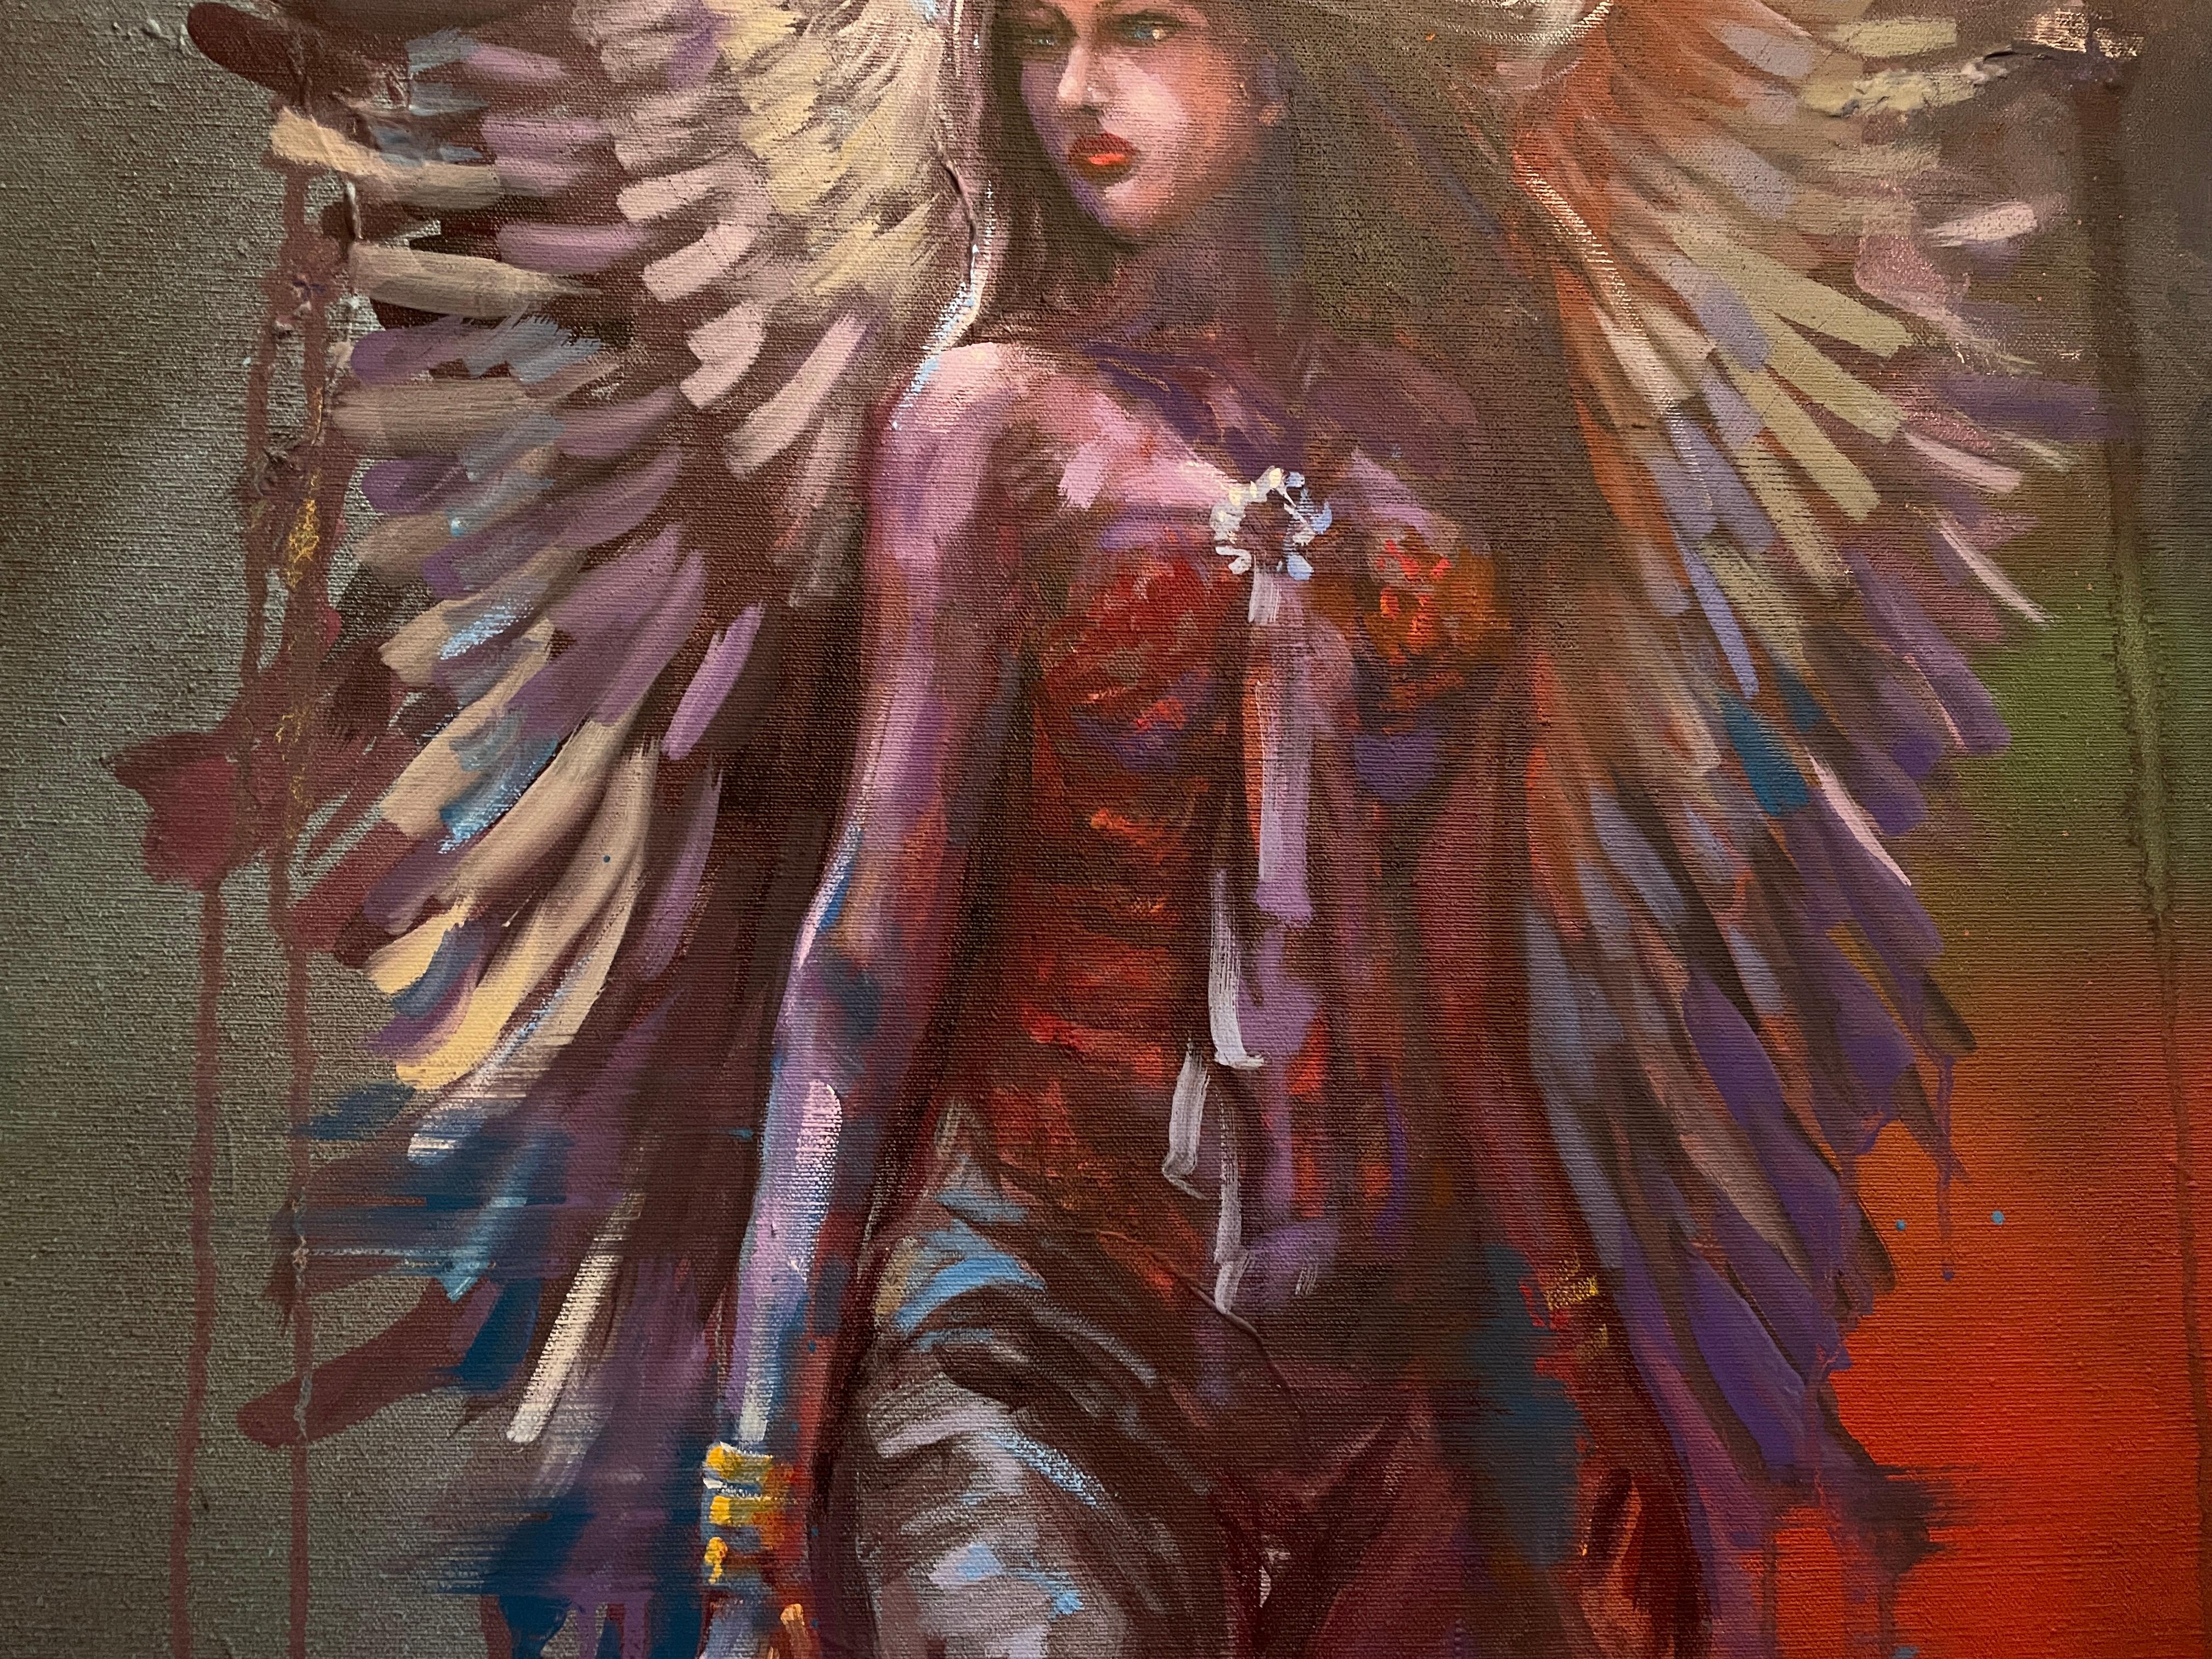 who painted the fallen angel painting